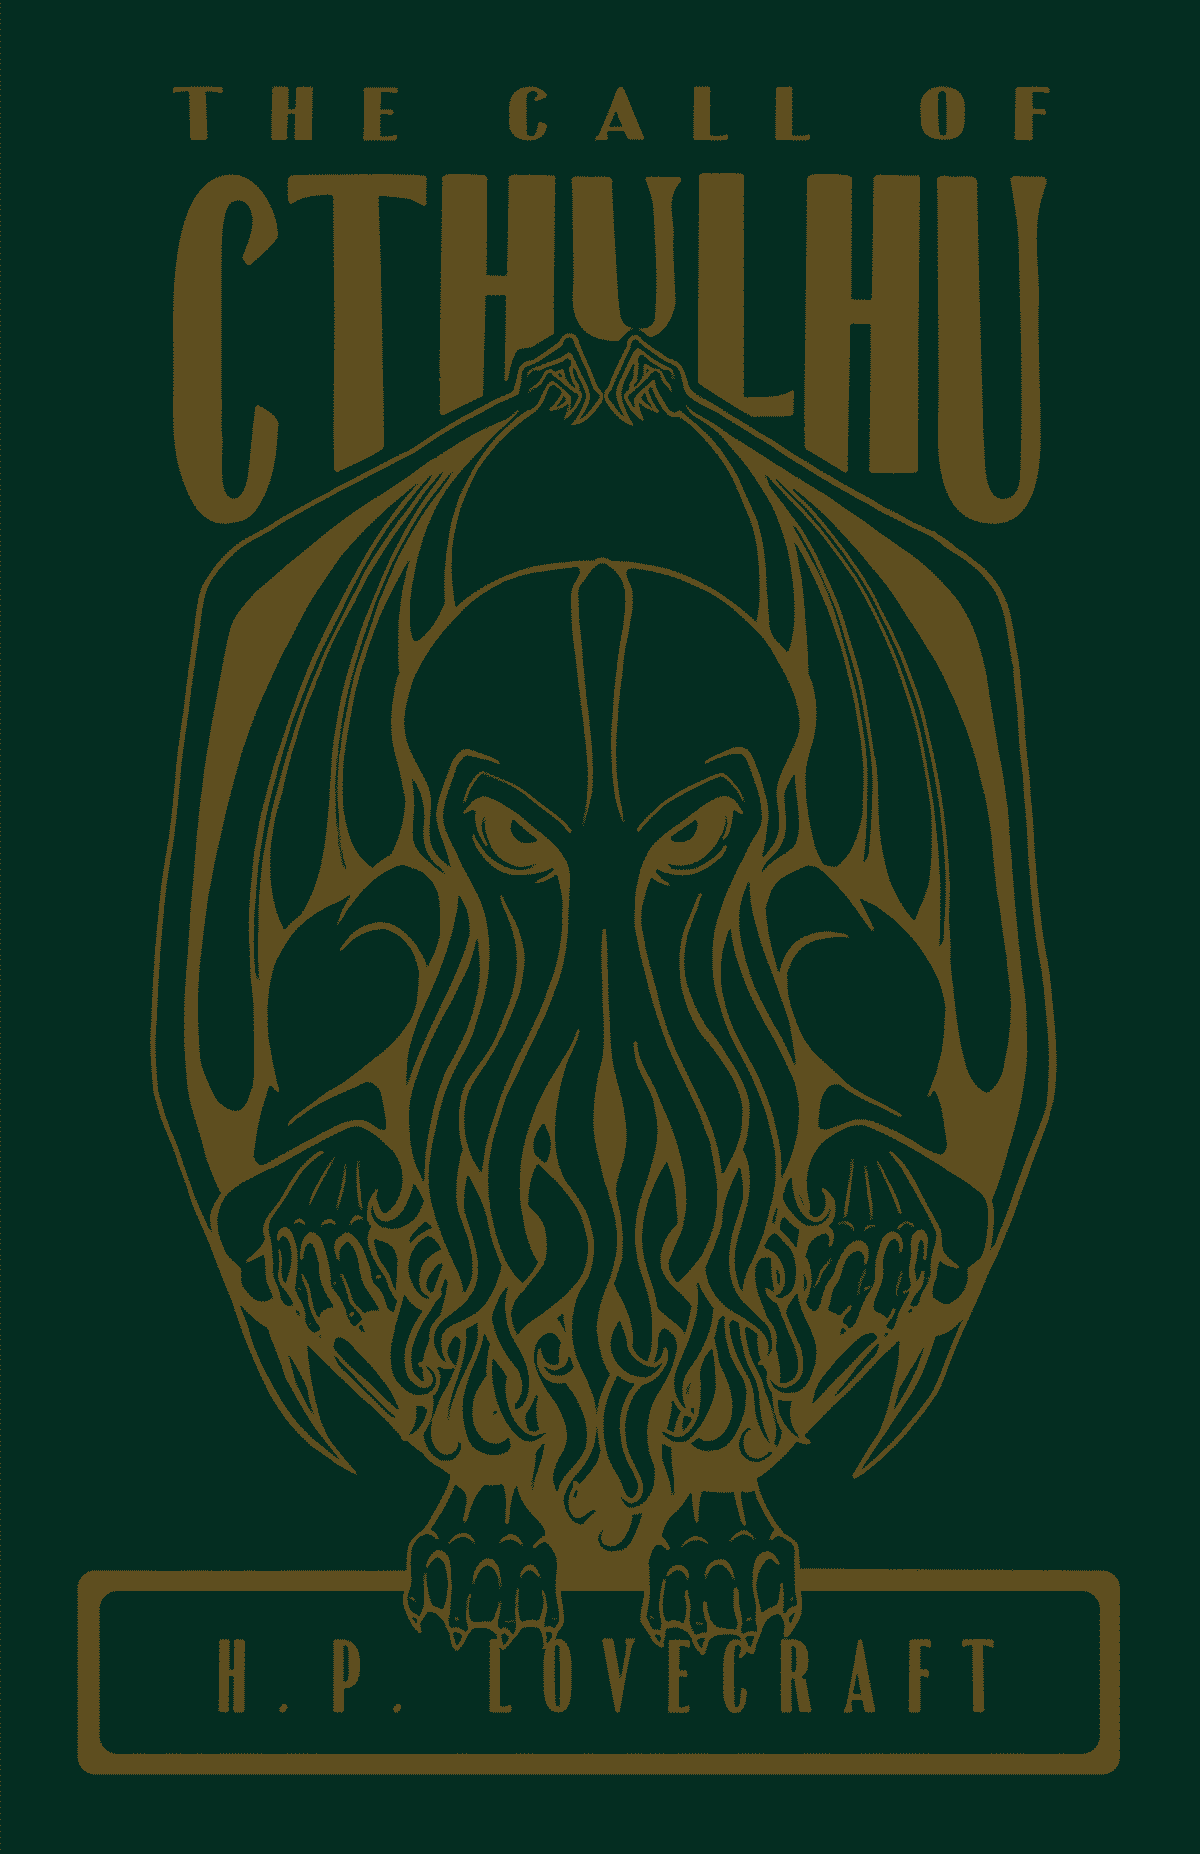 Book cover of a Cthulhu by Emma Castleberry.